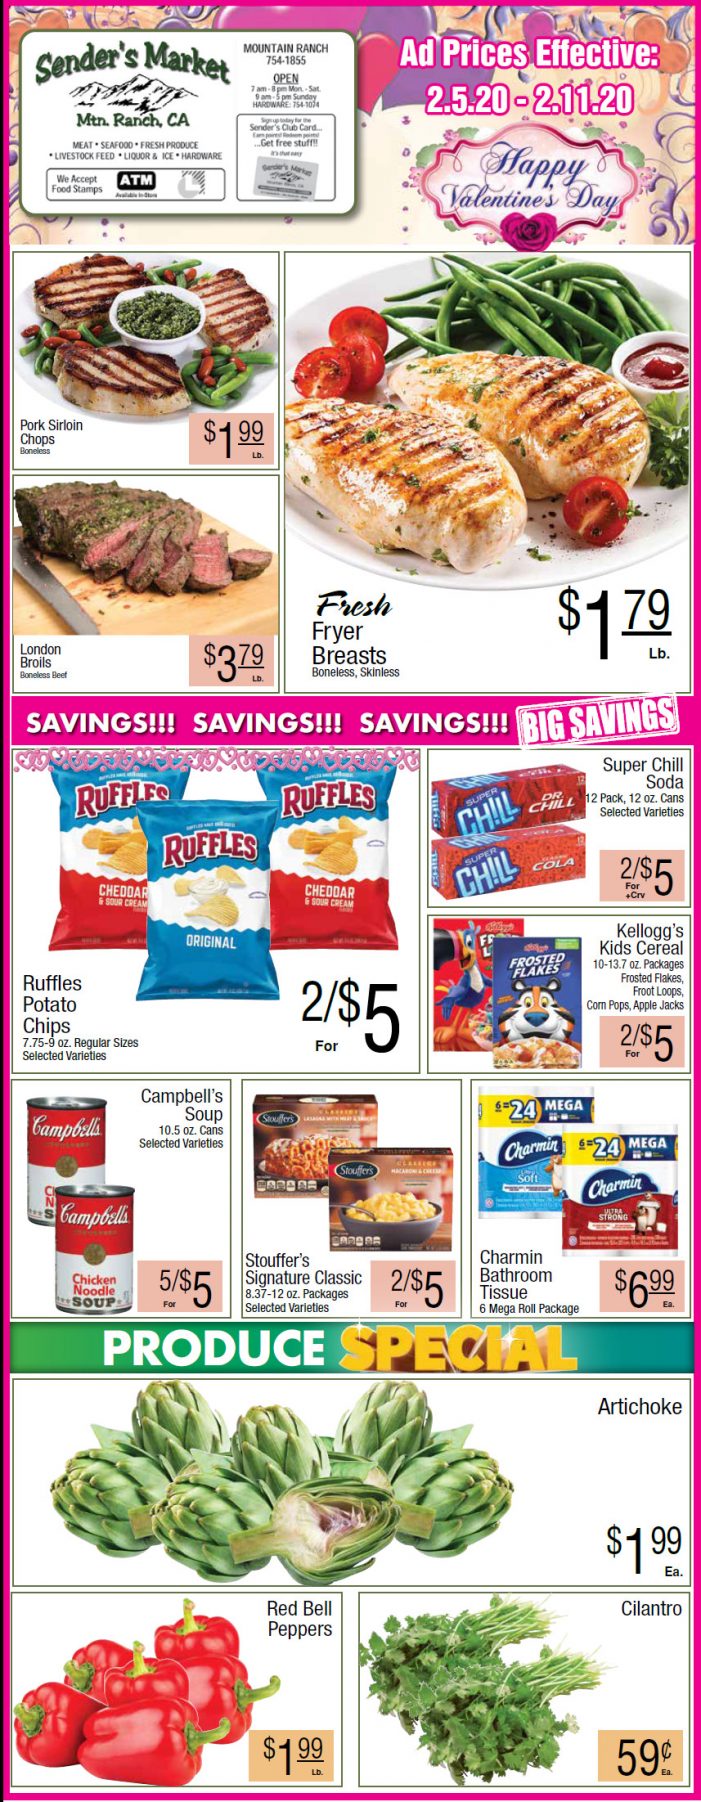 Sender’s Market’s Grocery Ad & Grocery Specials Through February 11th